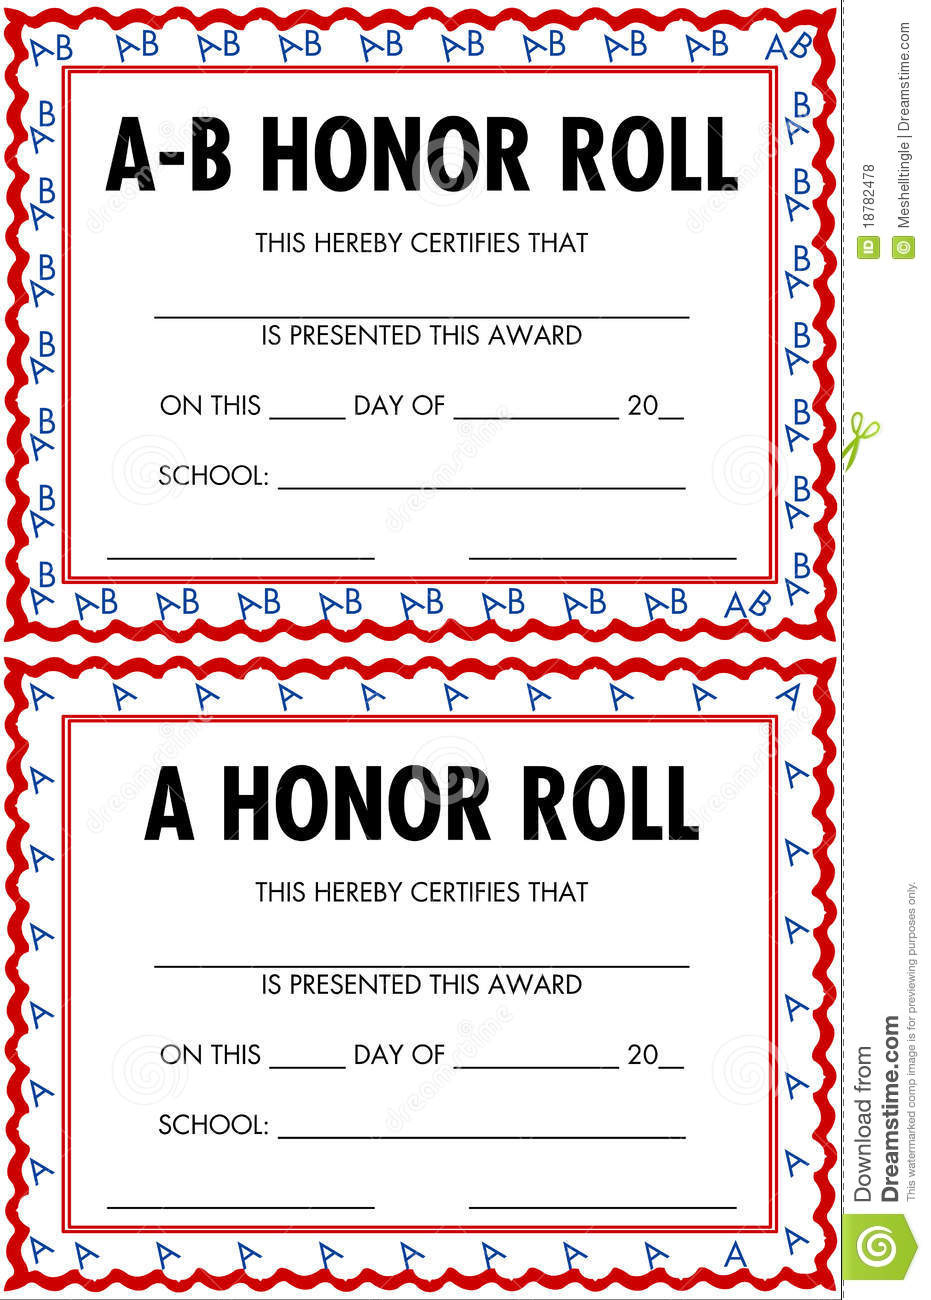 Honor Roll Certificates Stock Vector Illustration Of in Printable Honor Award Certificate Templates